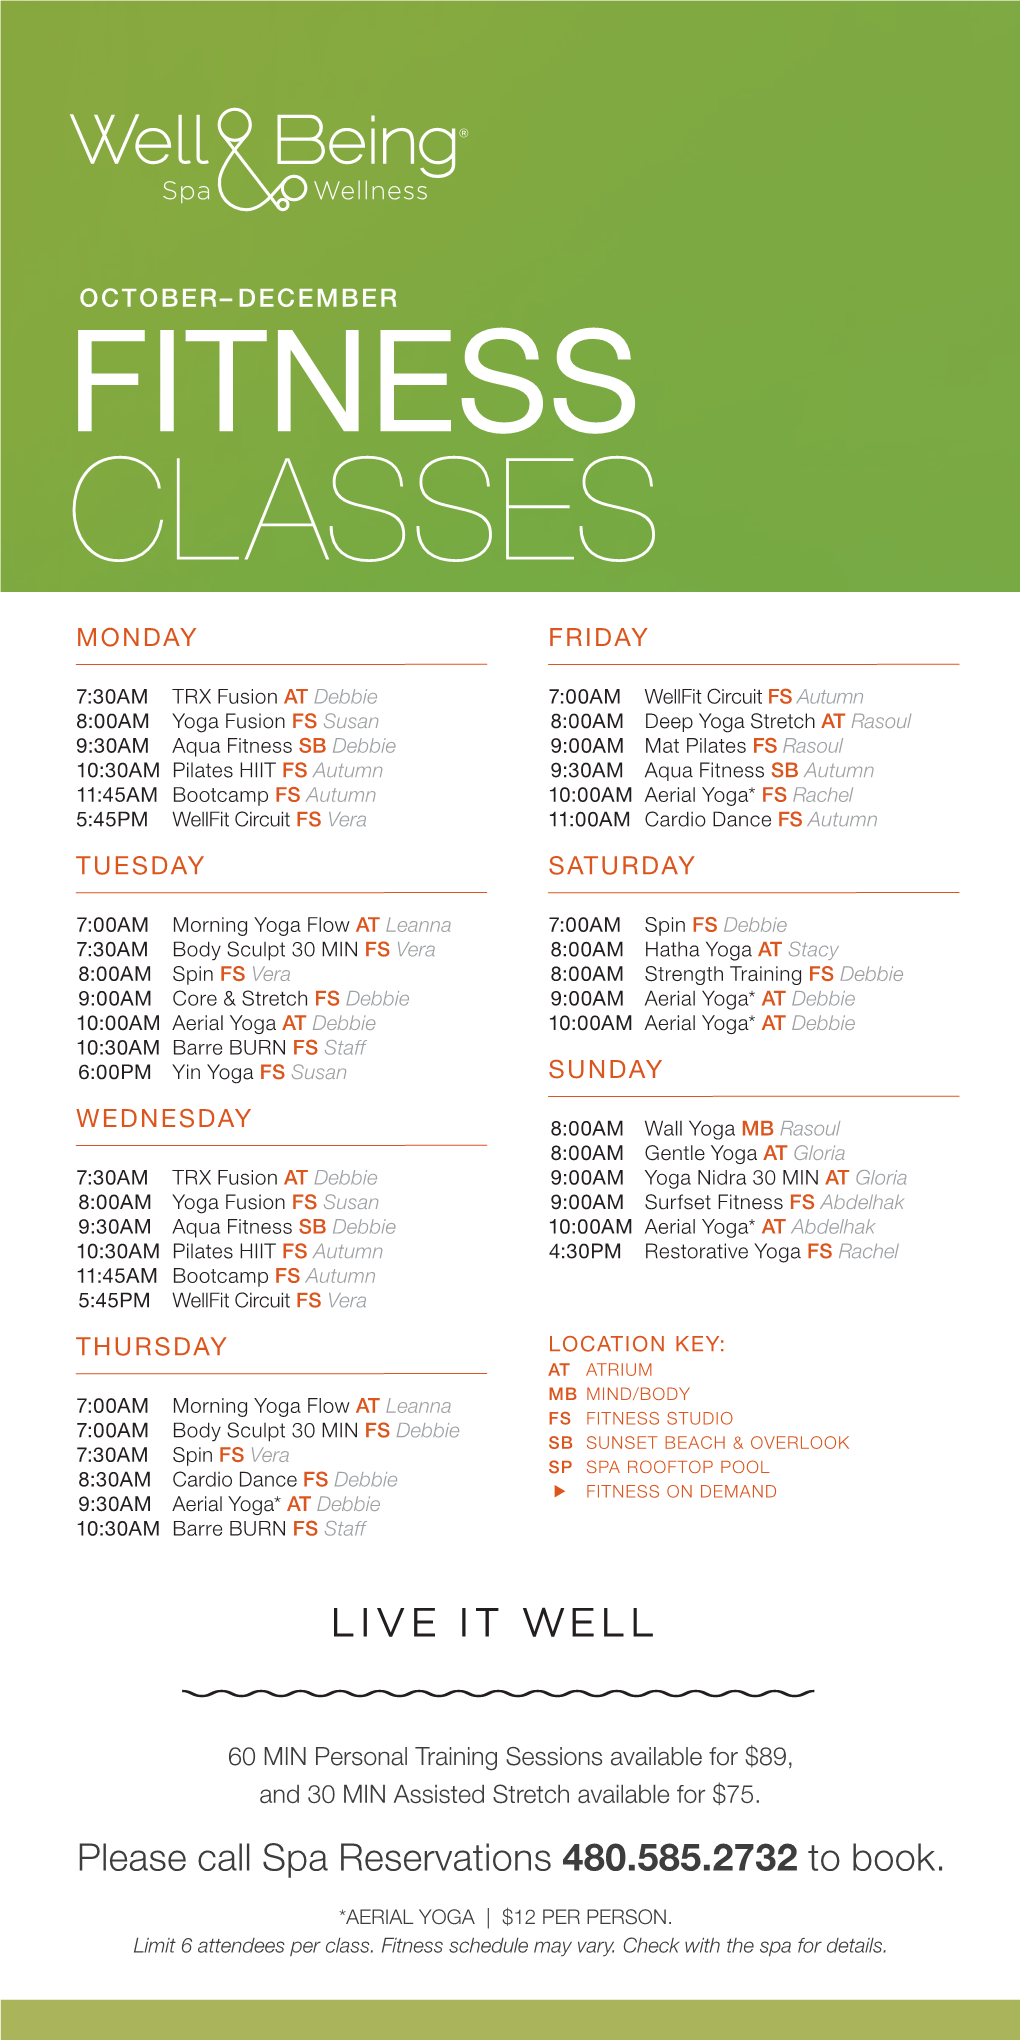 Well & Being Spa Fitness Schedule July